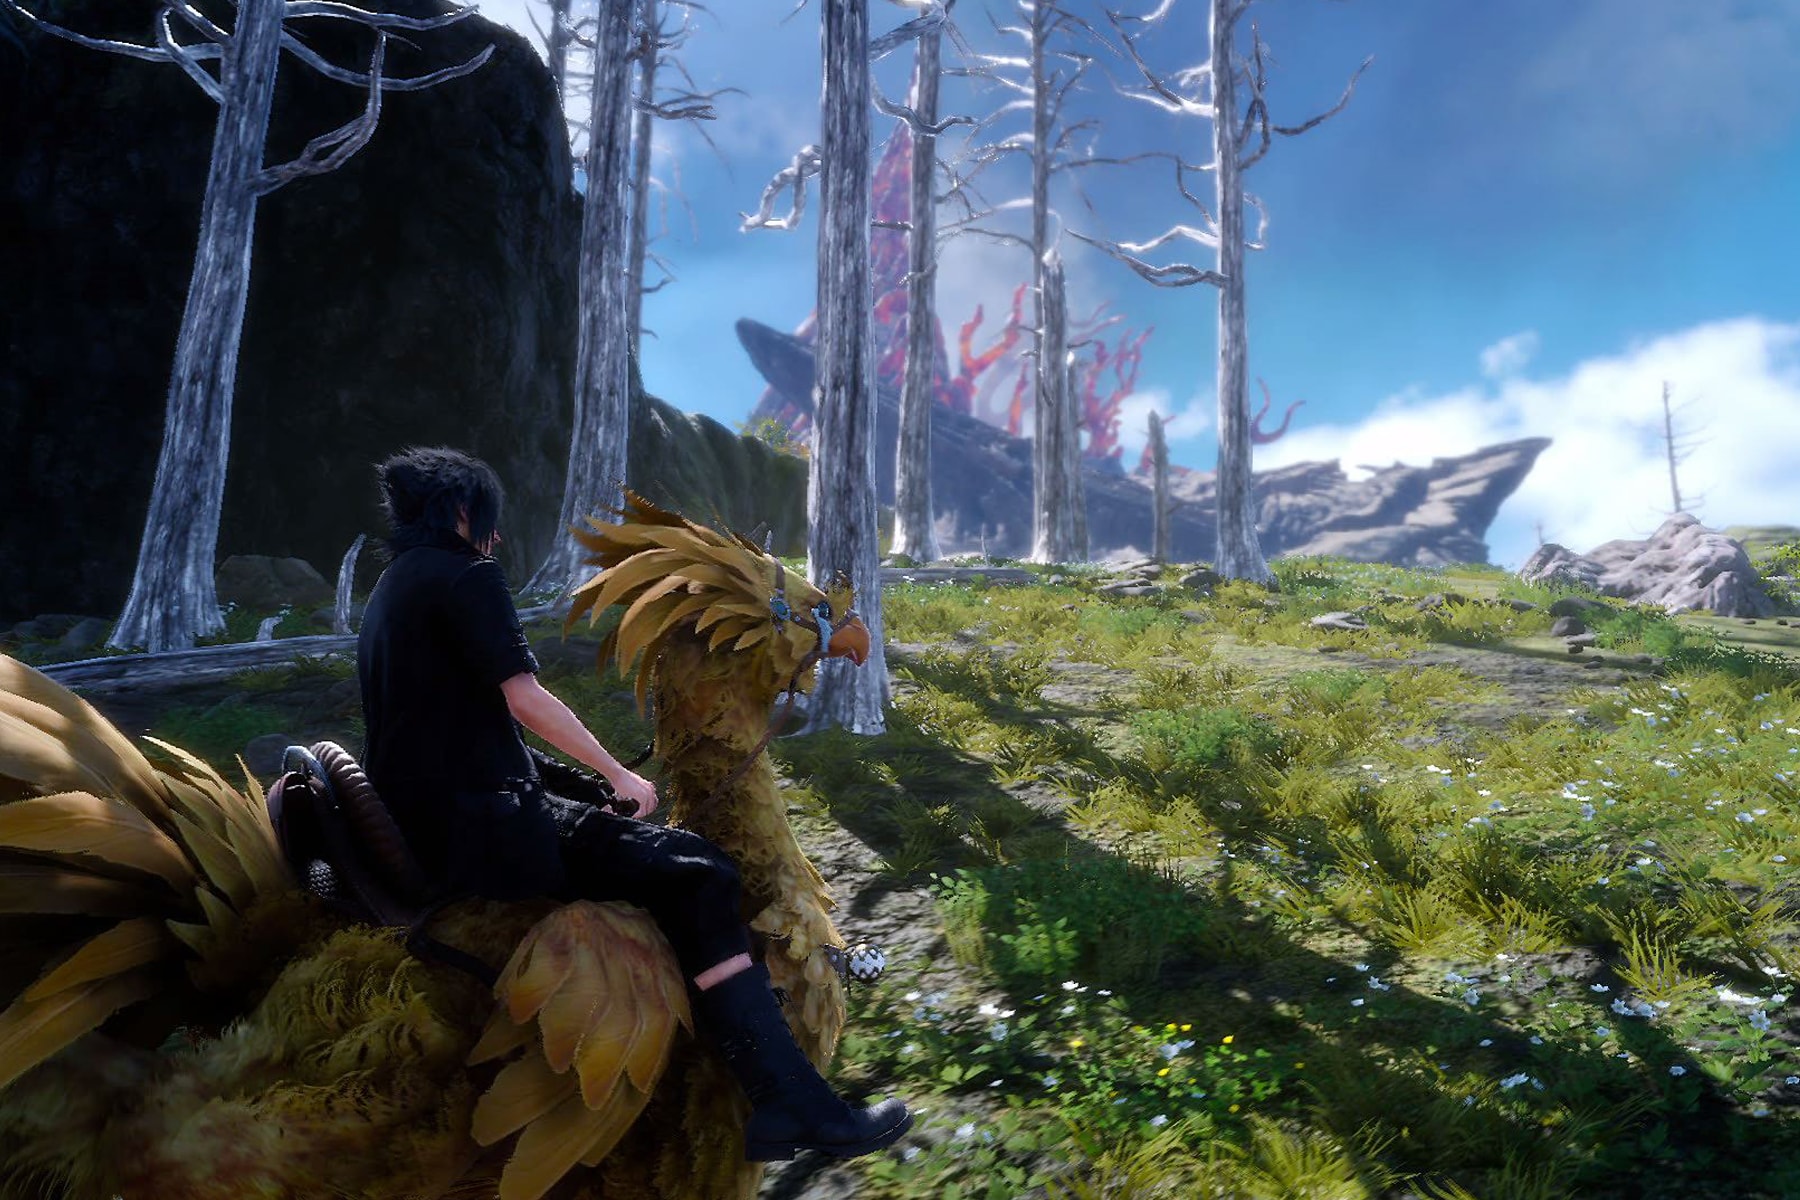 Screenshot from Final Fantasy XV featuring a character riding a bird-like creature